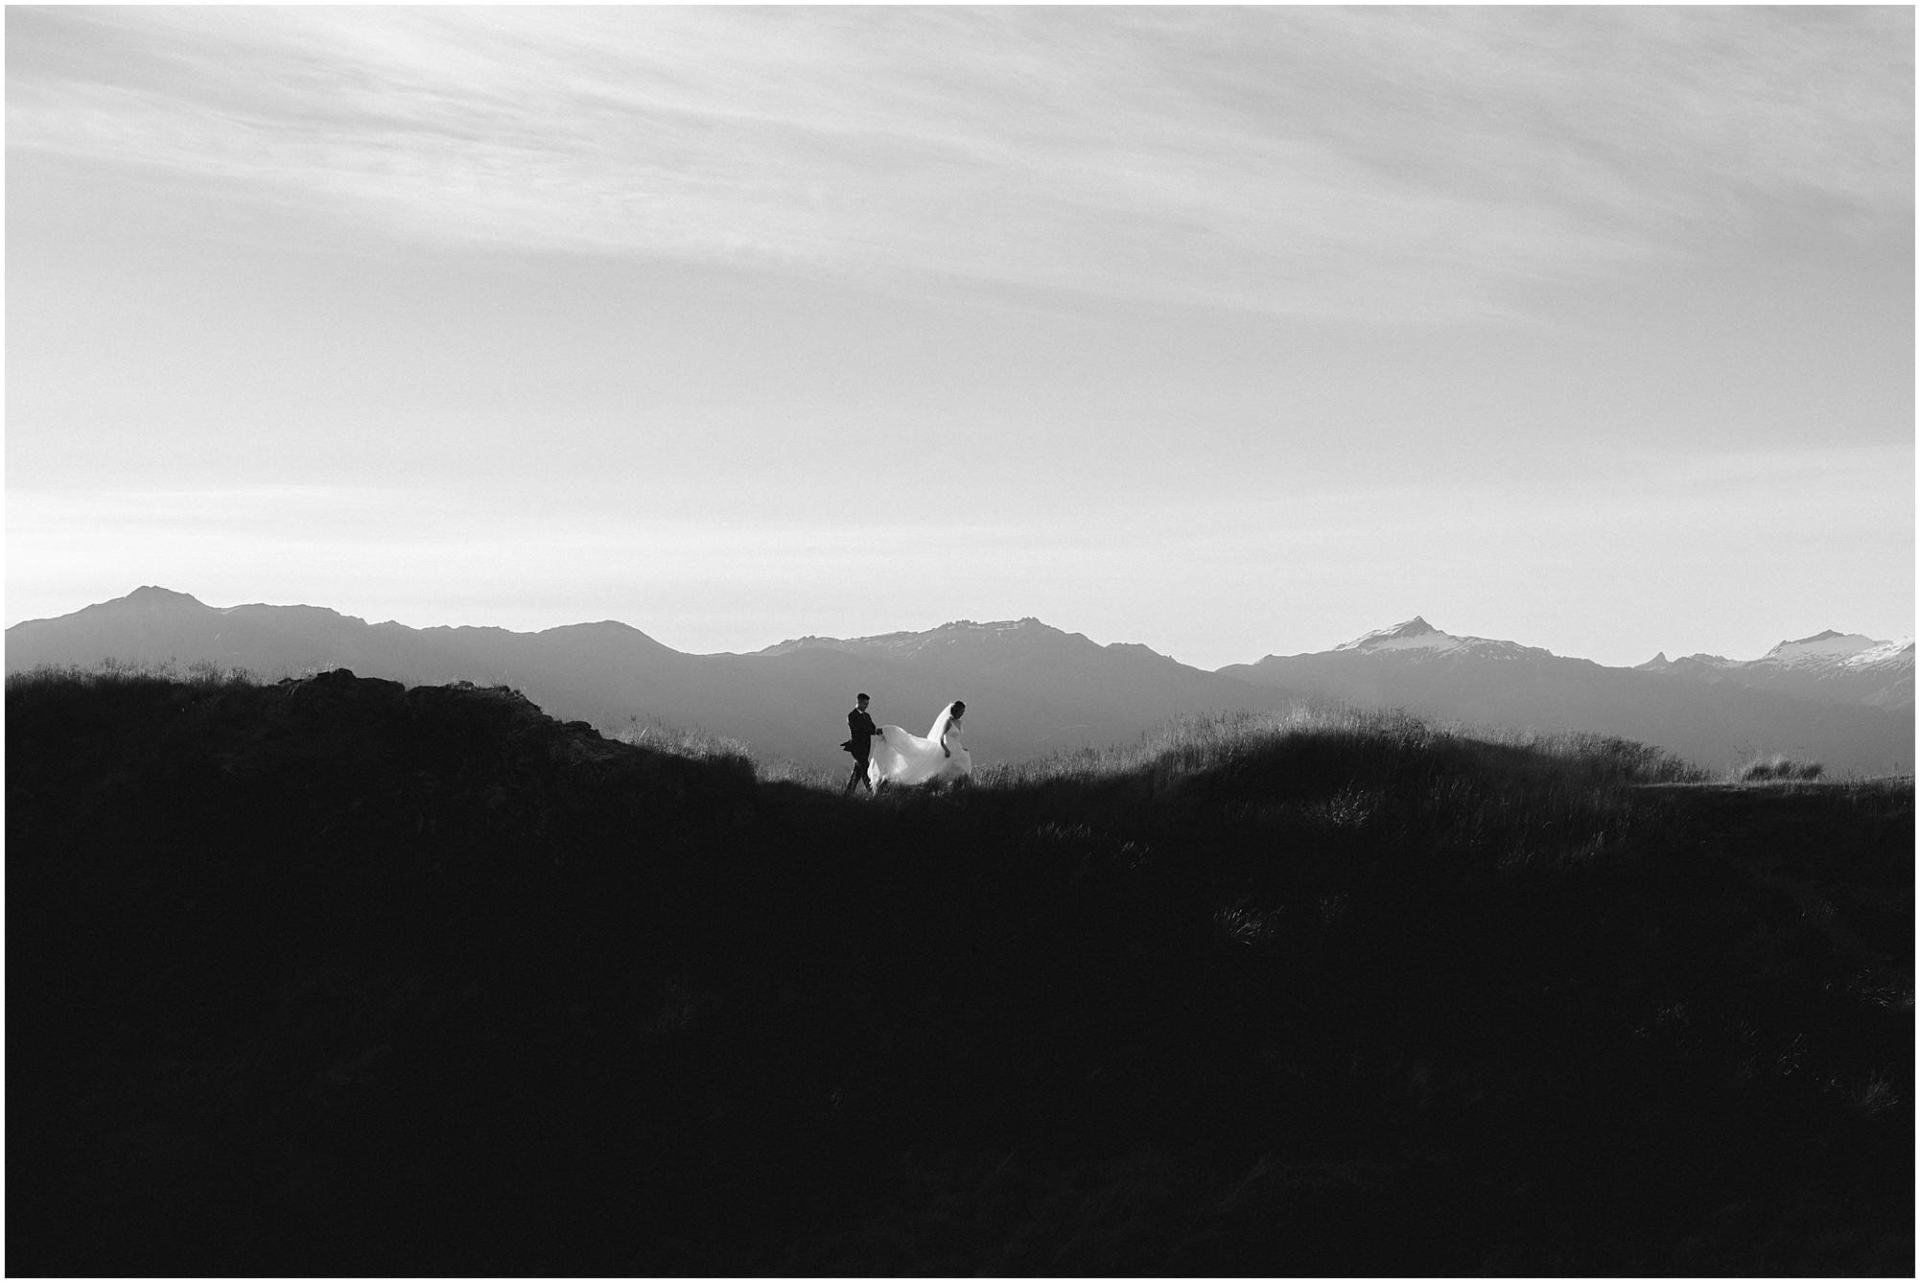 Charlotte Kiri Photography - Pre and Post Wedding Photography with a black and white image of an elegant bride walking in front of her groom across a peak, as he attentively holds her long train over the grass, with a silhouette of mountainous terrain behind them, in Wanaka, New Zealand